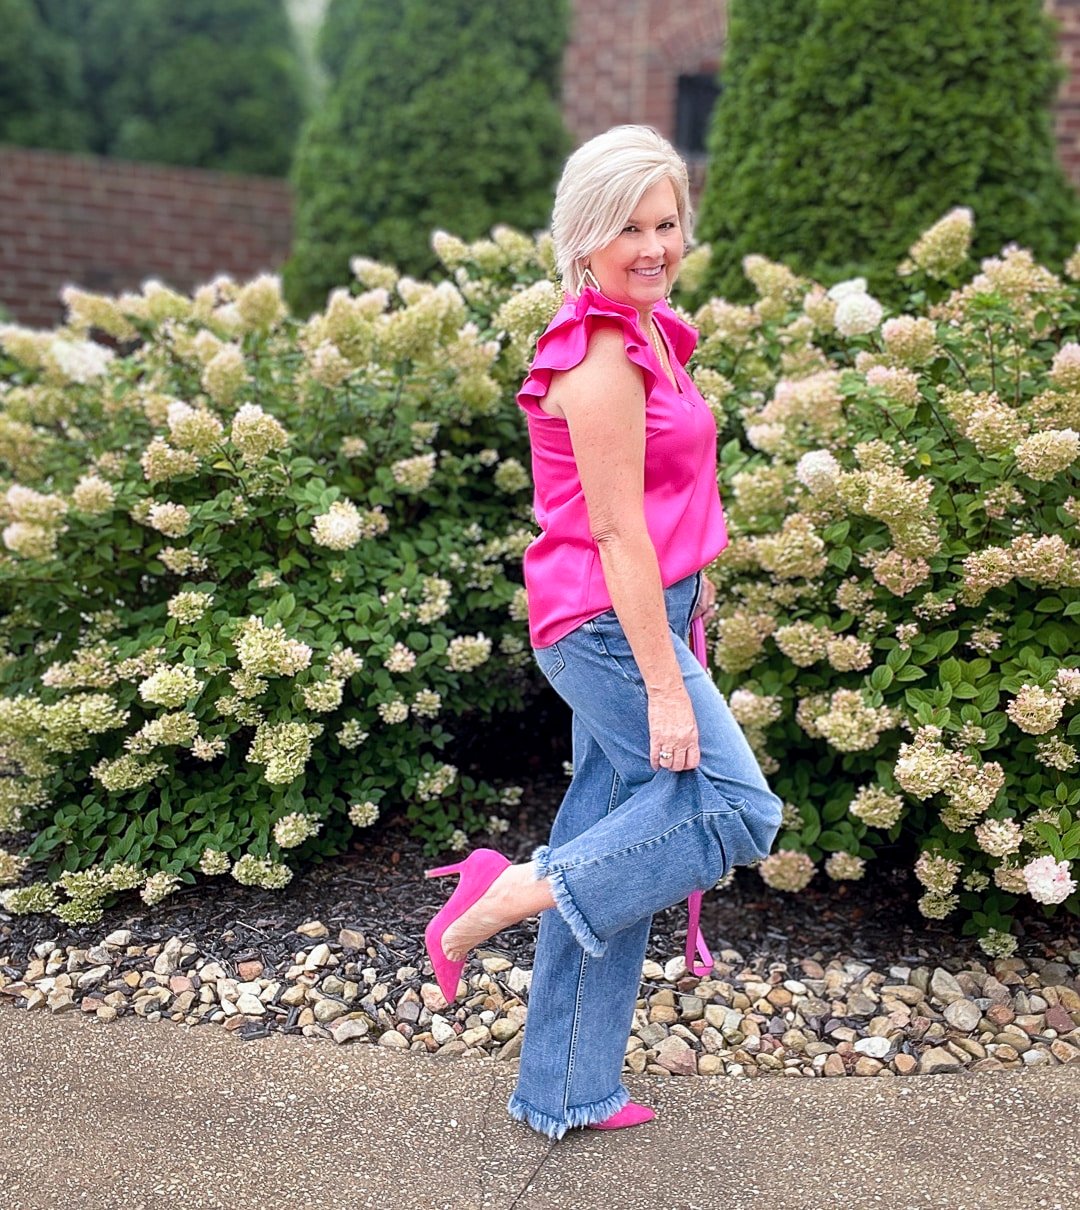 Over 40 Fashion Blogger, Tania Stephens is styling wide leg jeans with a pink ruffled top17